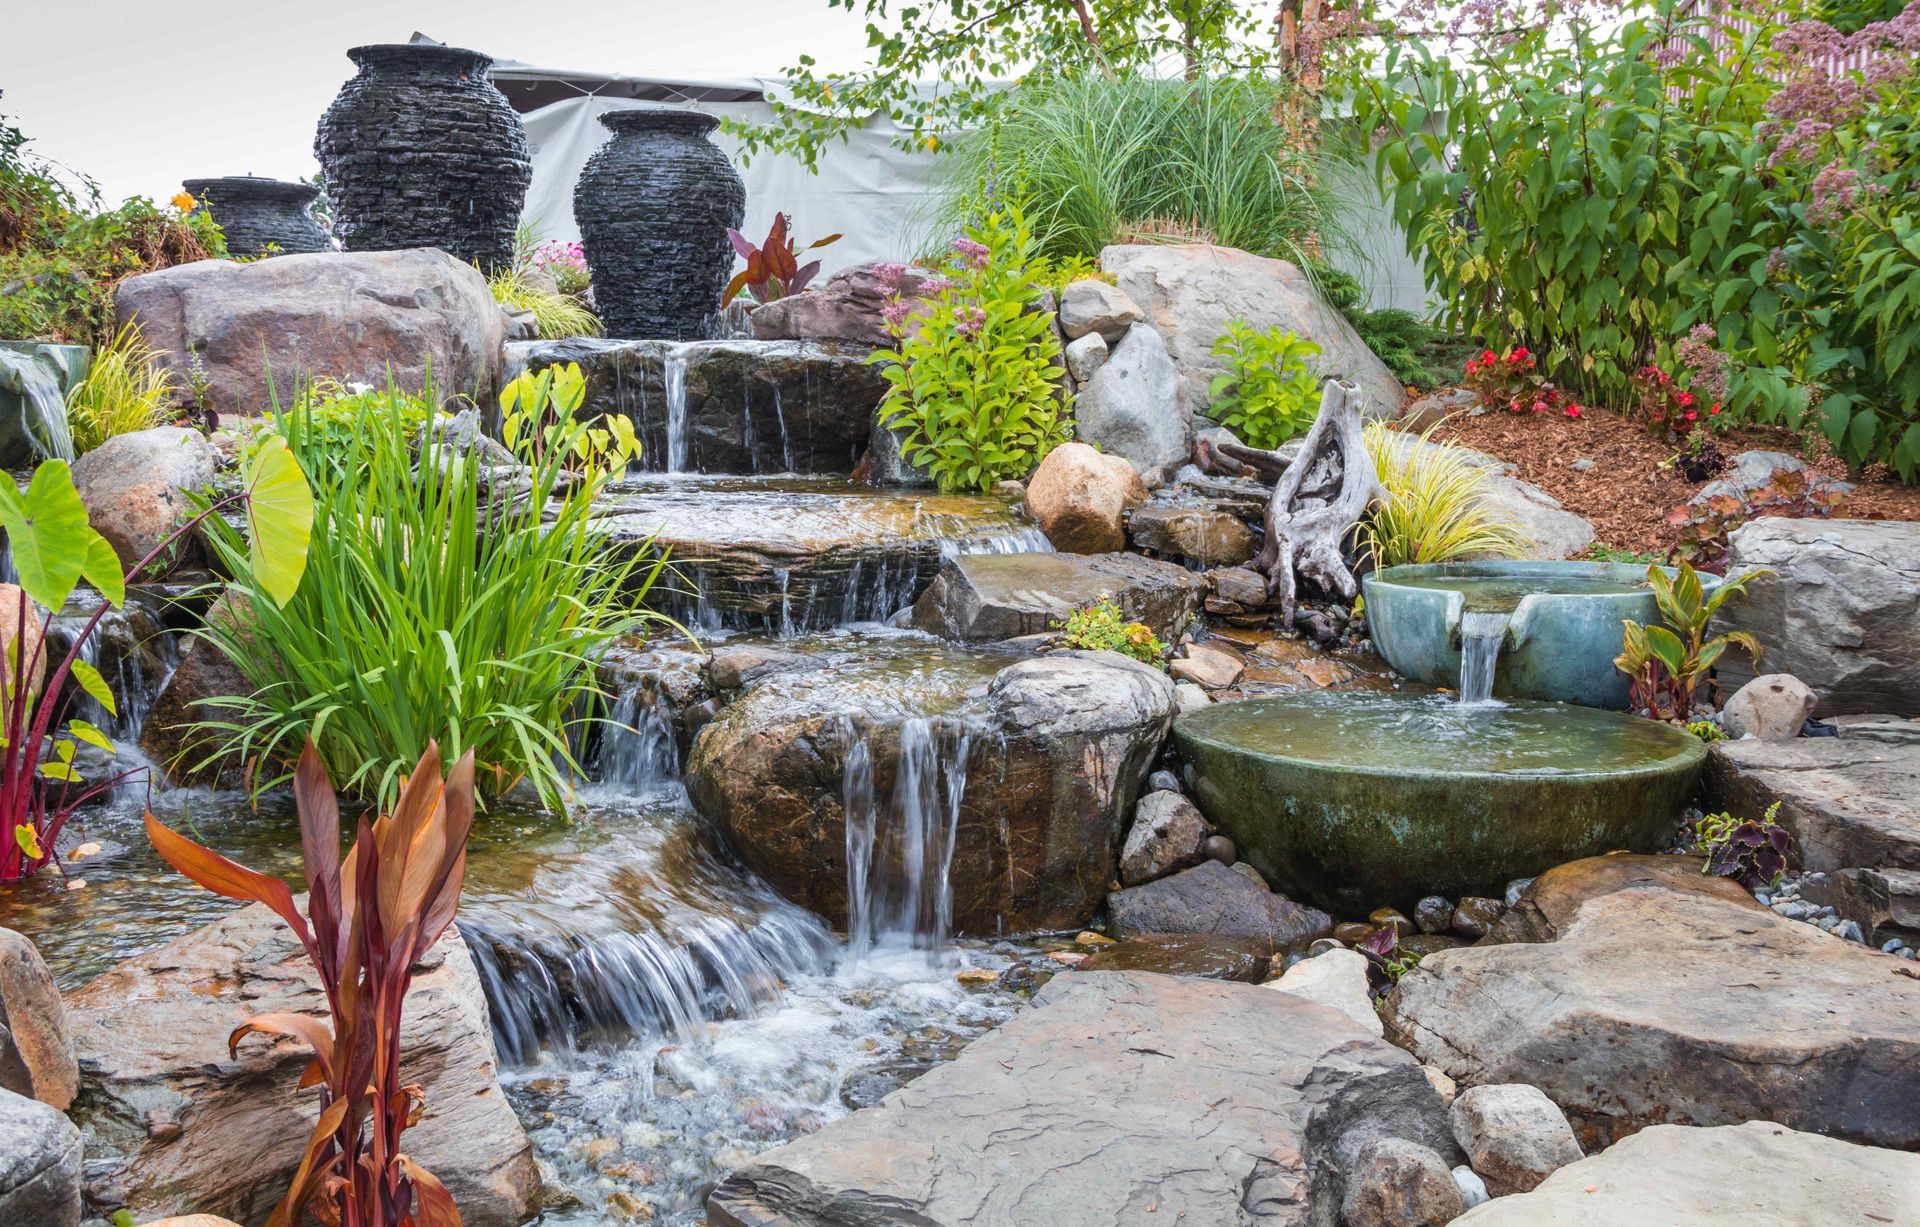 A beautiful cascading landscape waterfall surrounded by ceramic pots and basins.